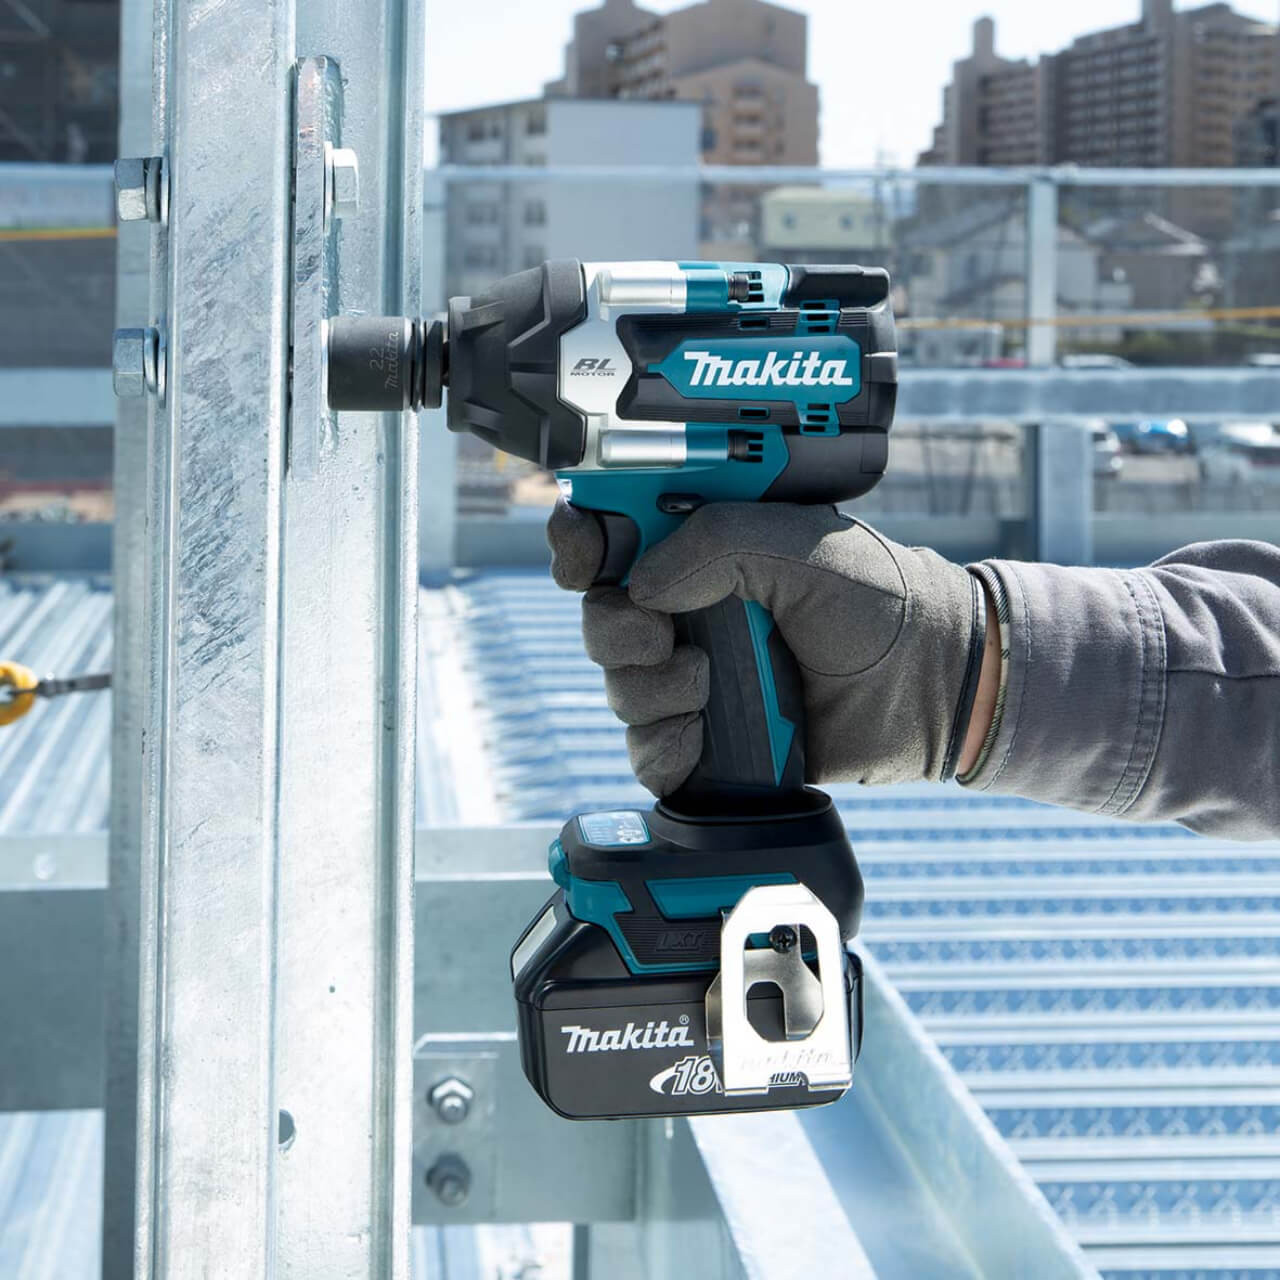 Makita 18V BRUSHLESS 1/2” Impact Wrench. 700Nm - Includes 2 x 5.0Ah Batteries. Rapid Charger & Makpac Case